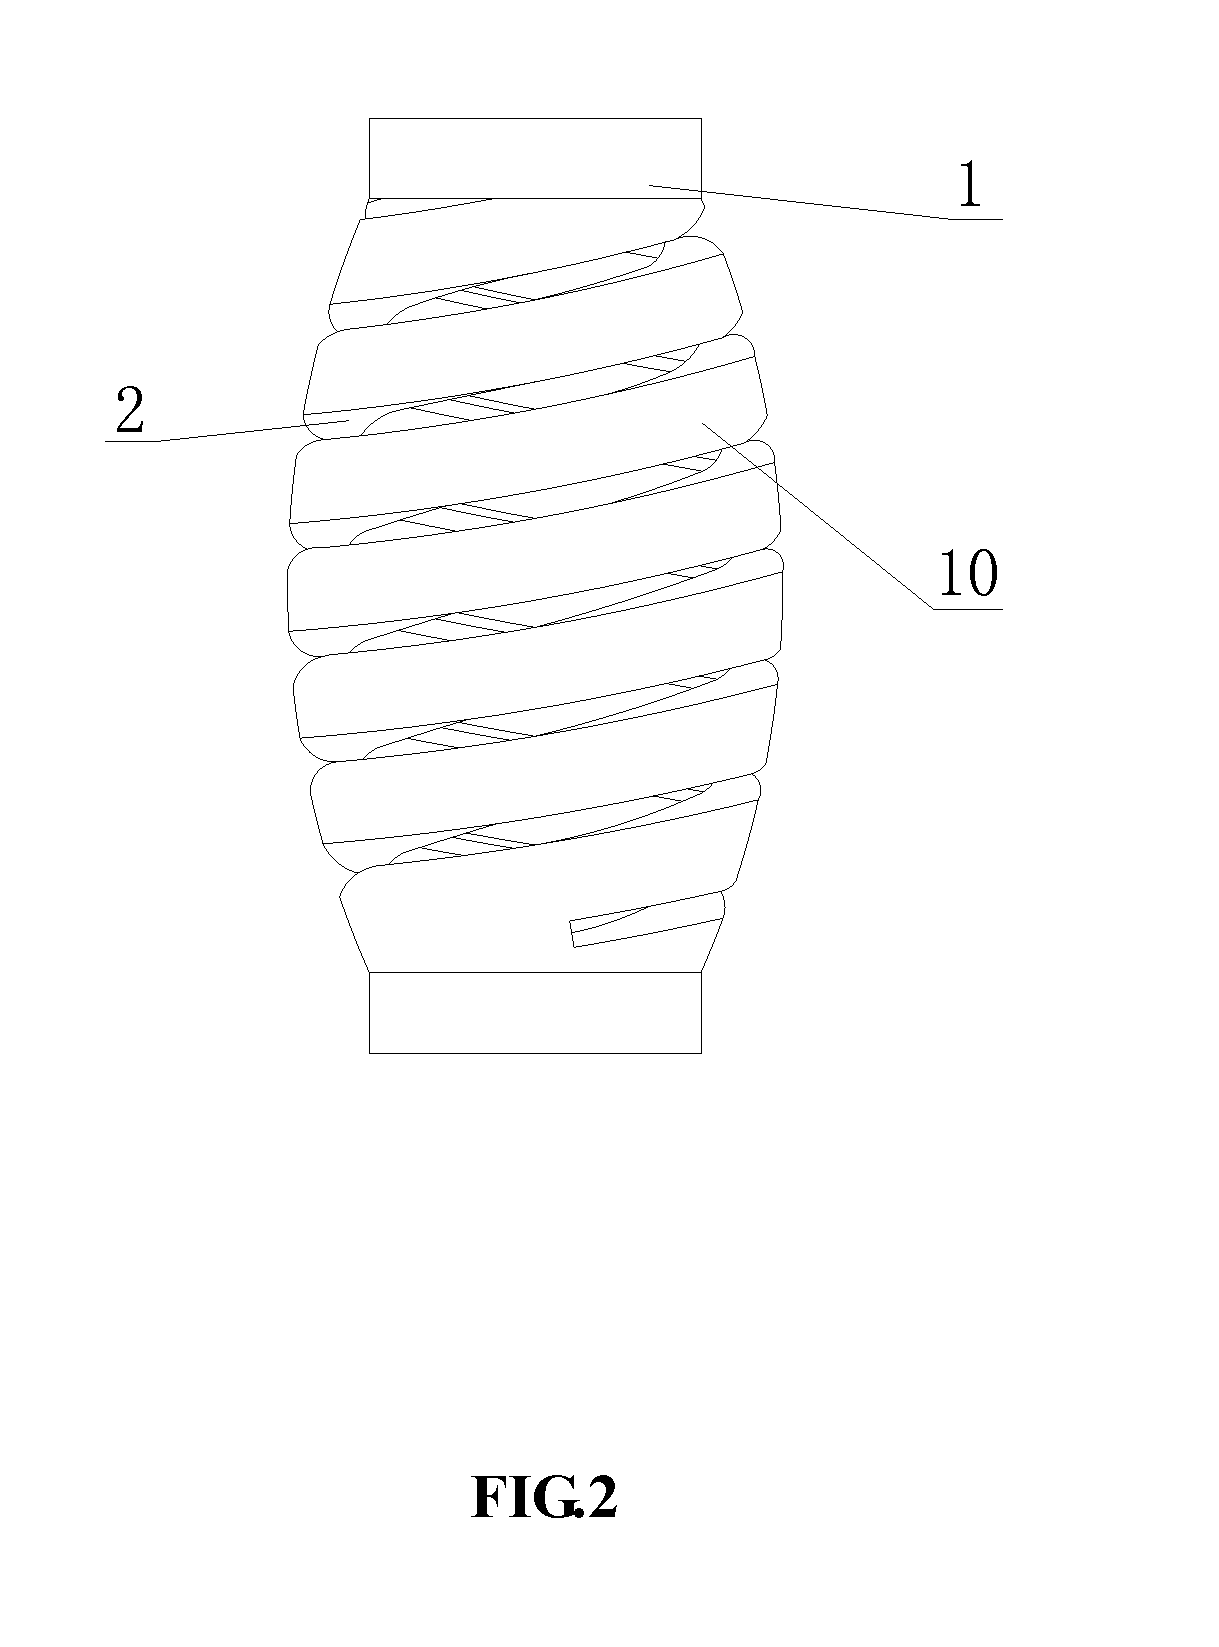 Energy-gathered bundle type nesting plugging and wall reinforcing device and application thereof in karst cave plugging